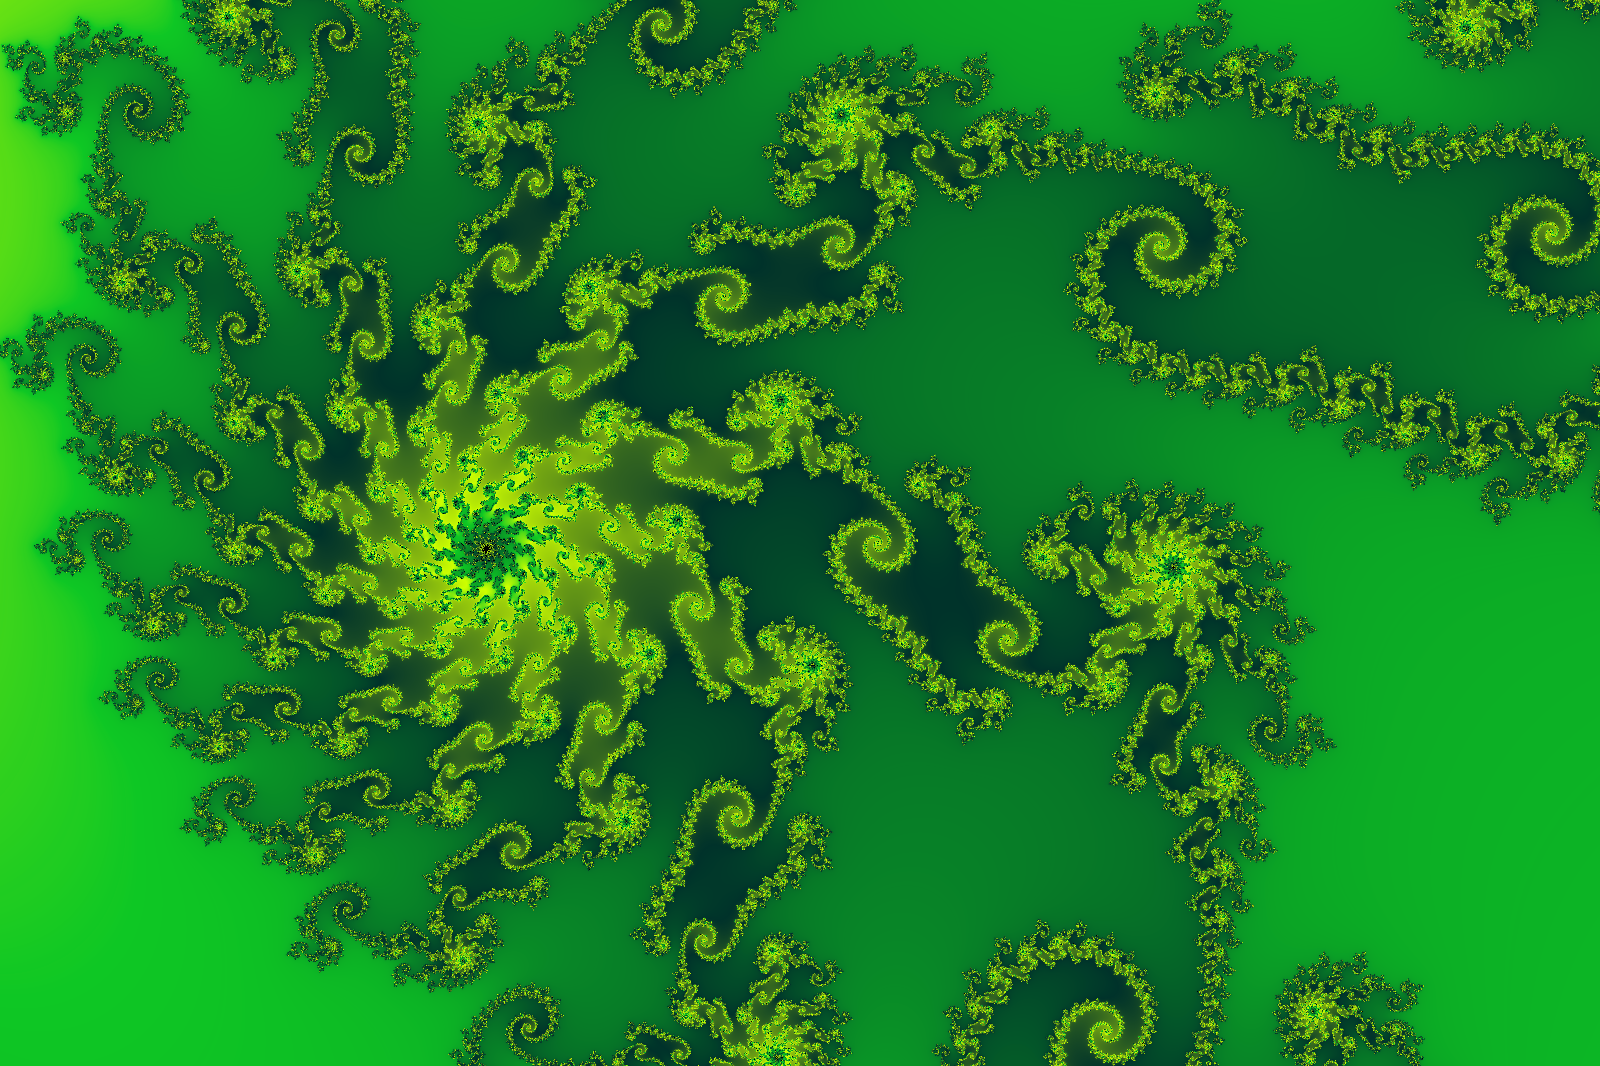 example fractal image 2